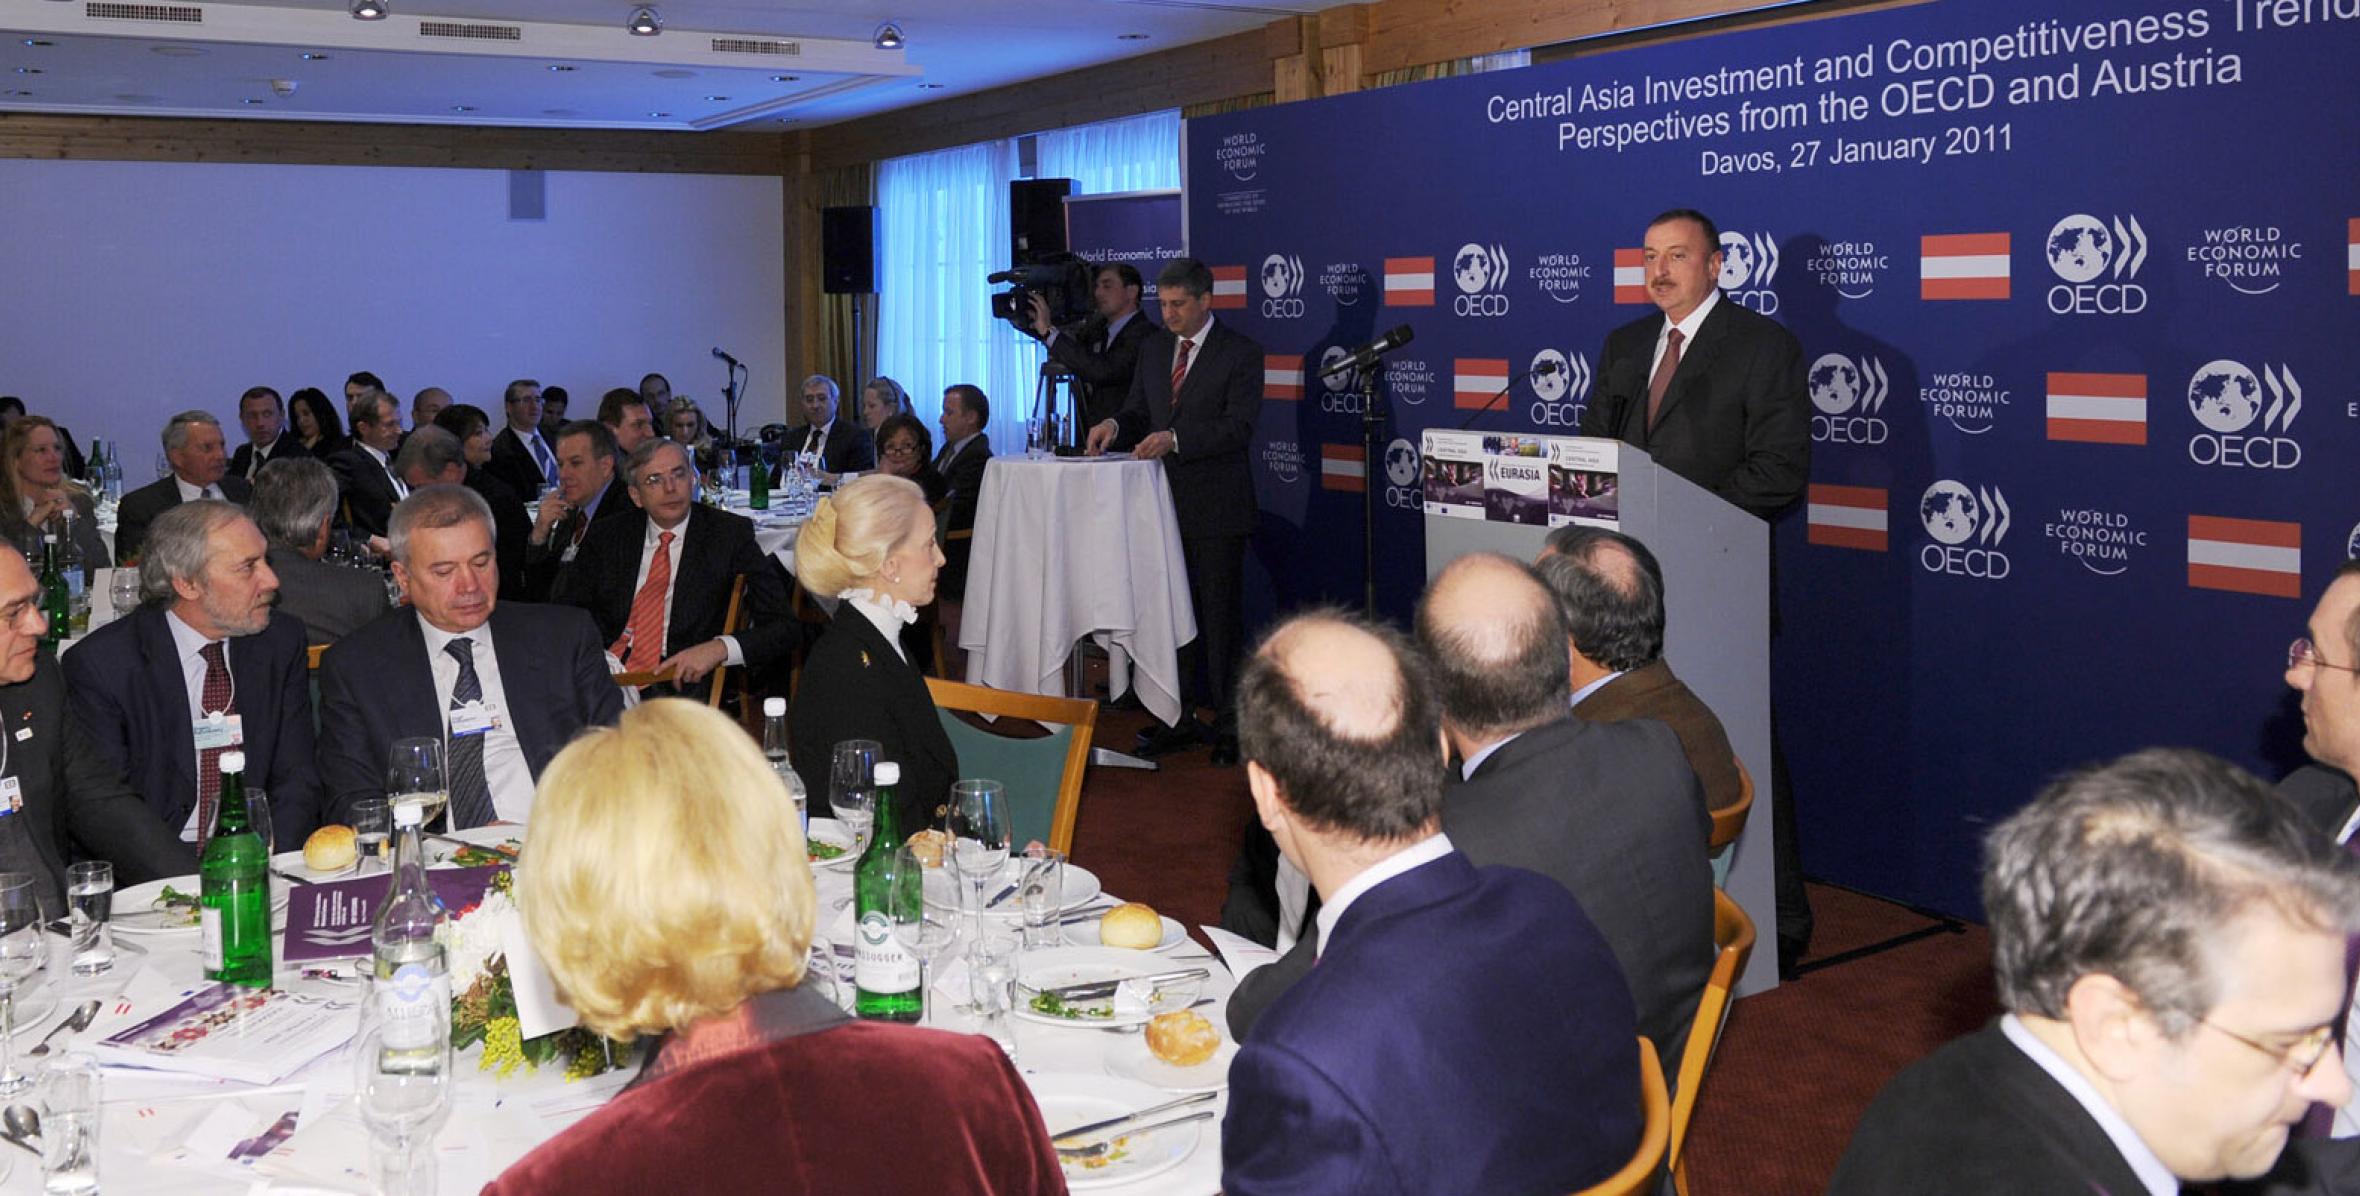 Ilham Aliyev attended the joint Austria-OECD lunch in Davos